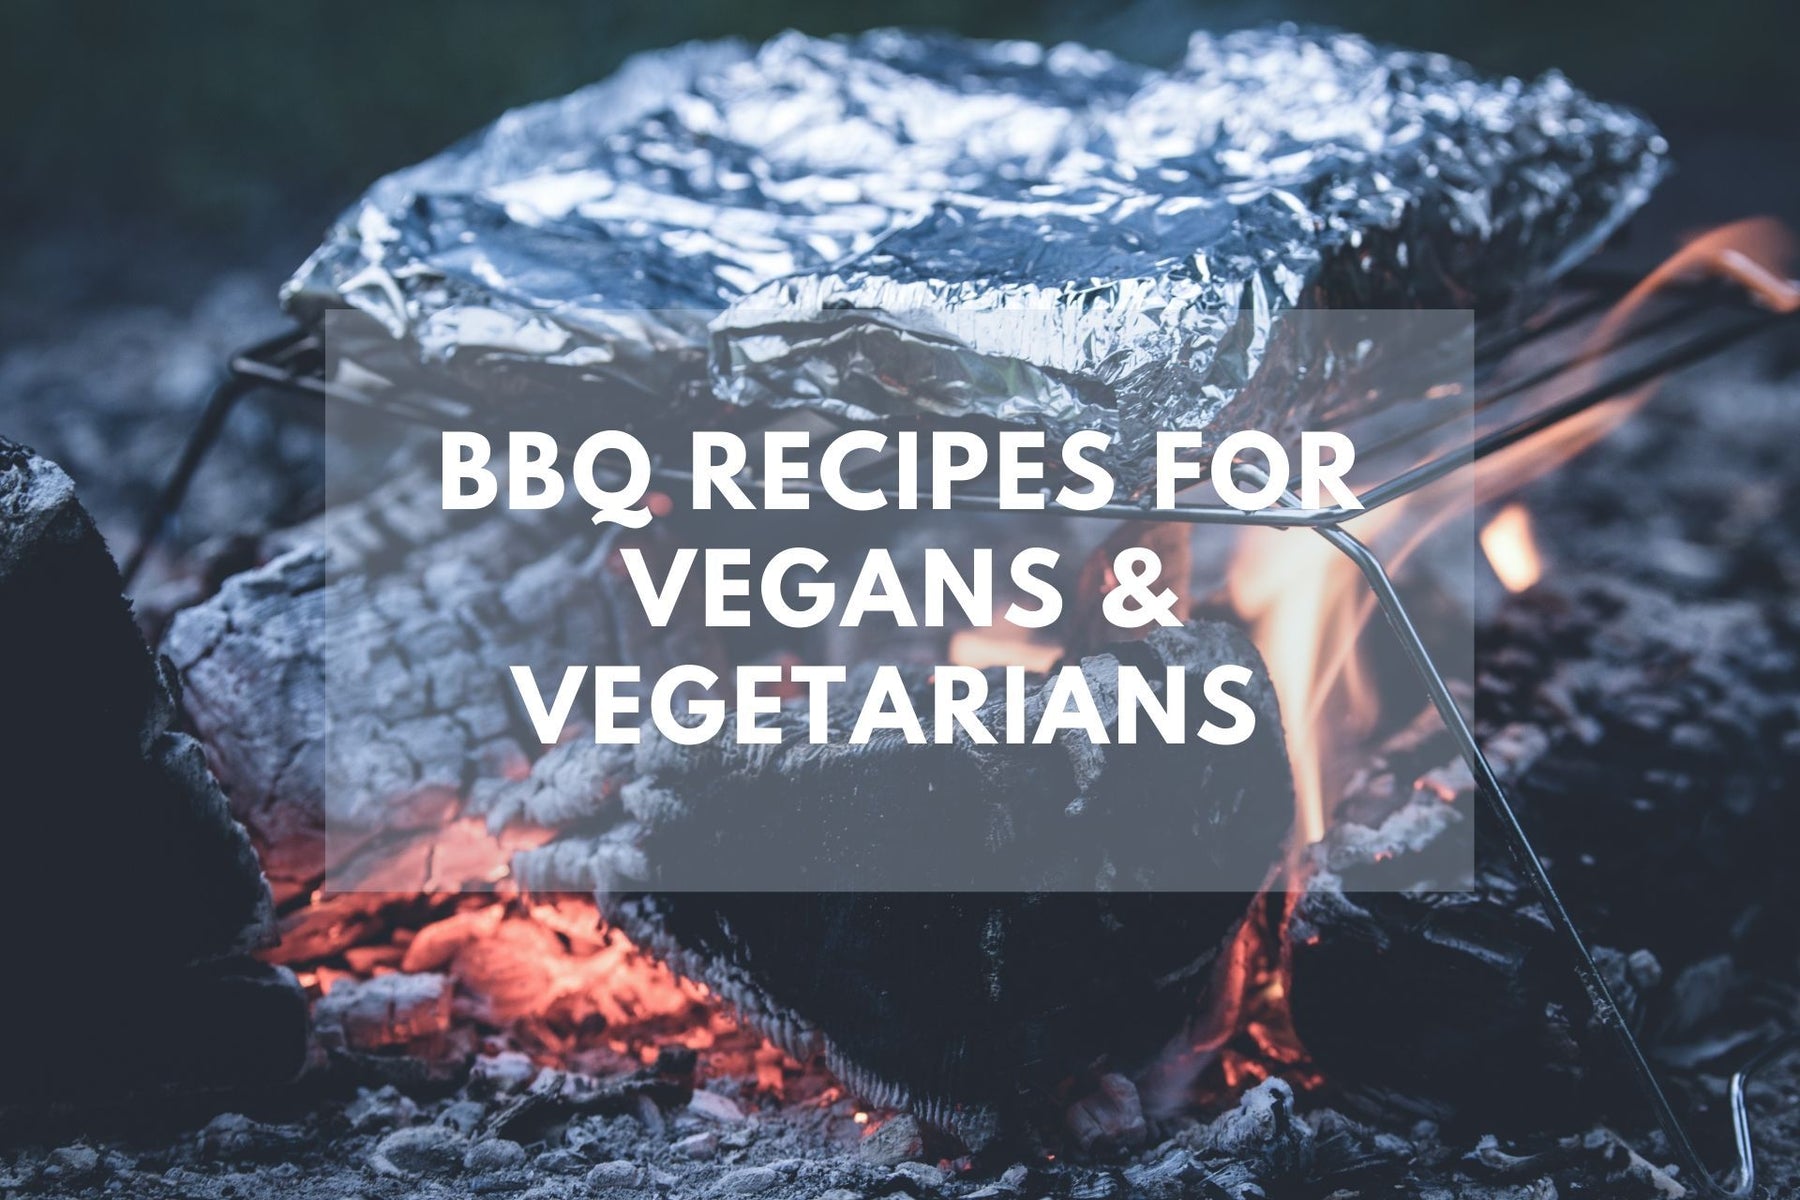 Outdoors - BBQ Recipes for Vegans and Vegetarians